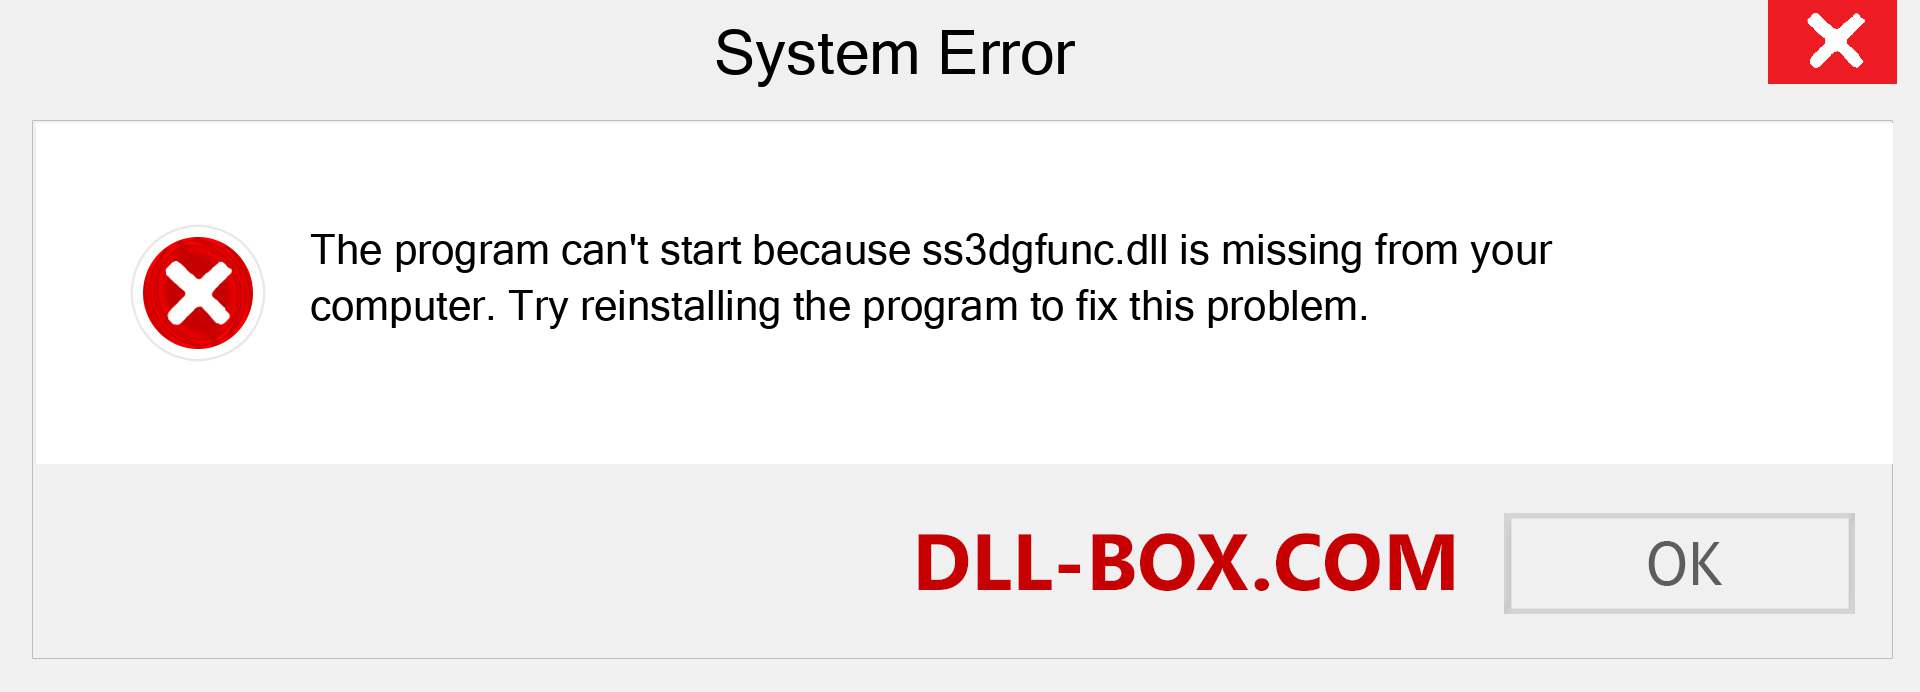  ss3dgfunc.dll file is missing?. Download for Windows 7, 8, 10 - Fix  ss3dgfunc dll Missing Error on Windows, photos, images